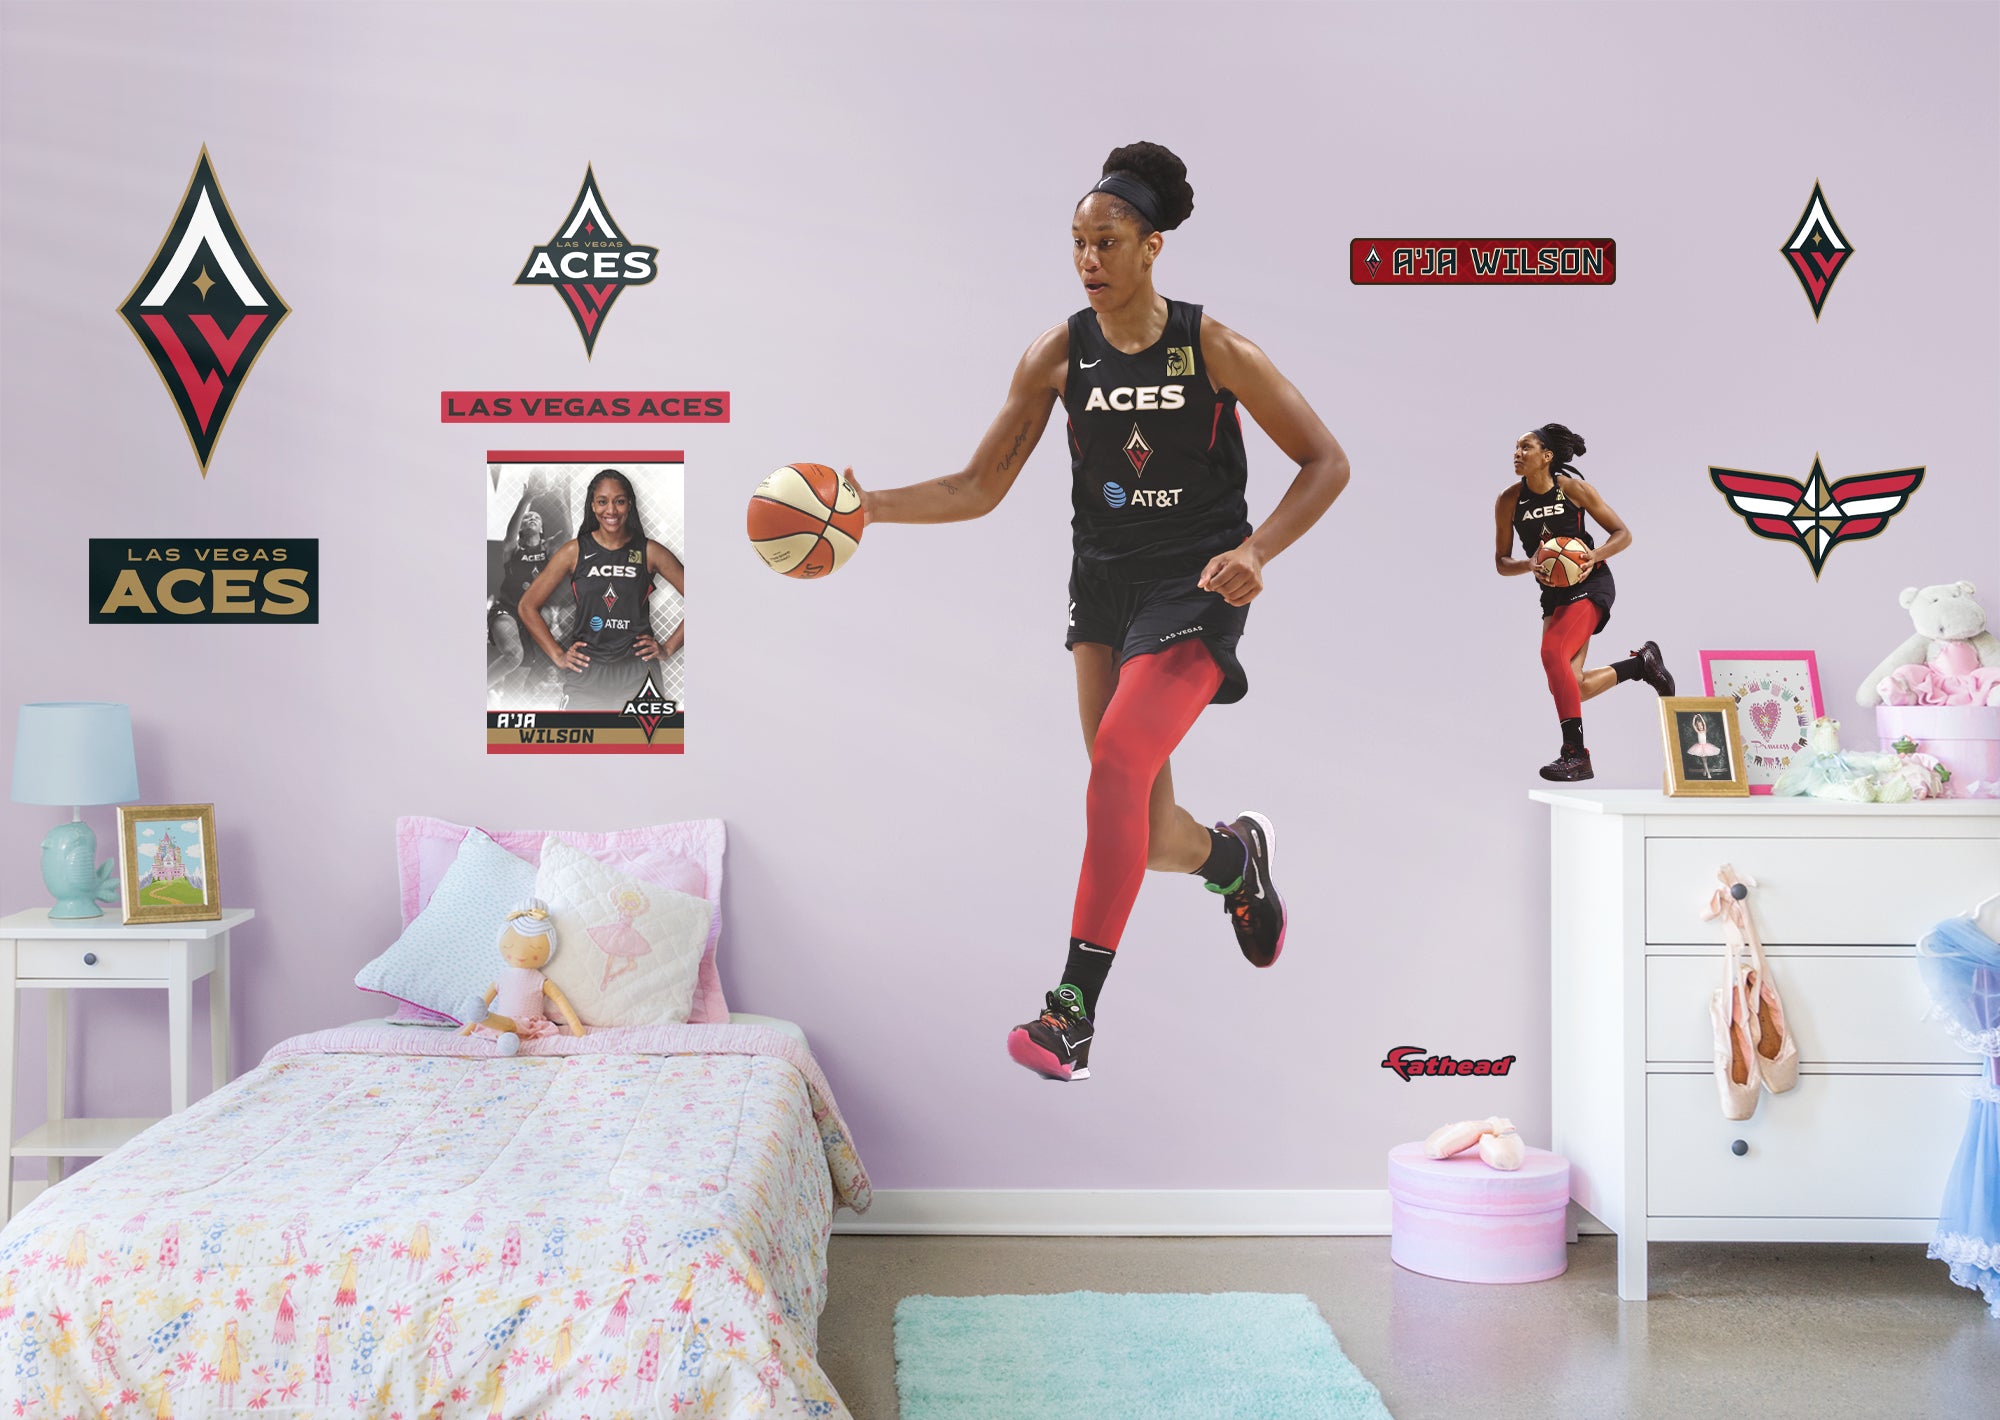 AJa Wilson 2021 for Las Vegas Aces - Officially Licensed WNBA Removable Wall Decal Life-Size Athlete + 10 Decals (50"W x 78"H)